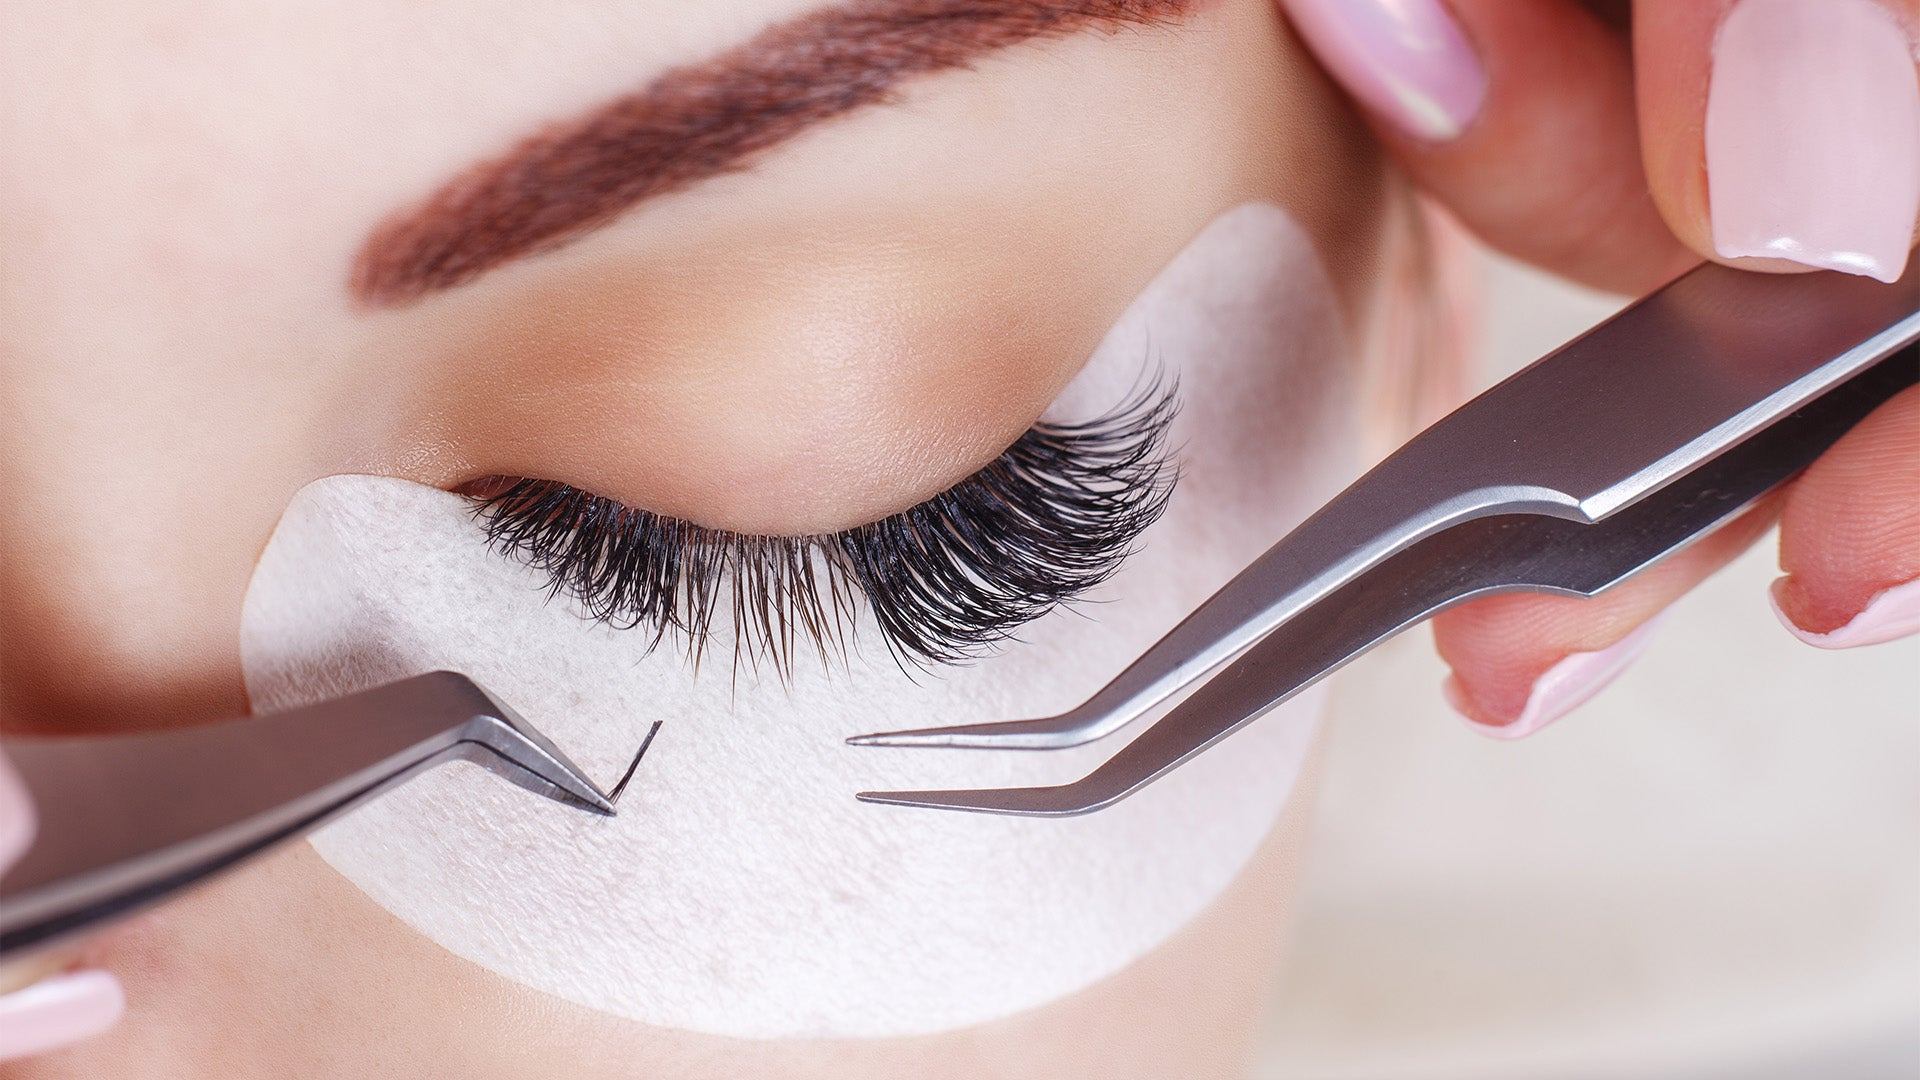 Classic Eyelash Extensions Tips and Tricks